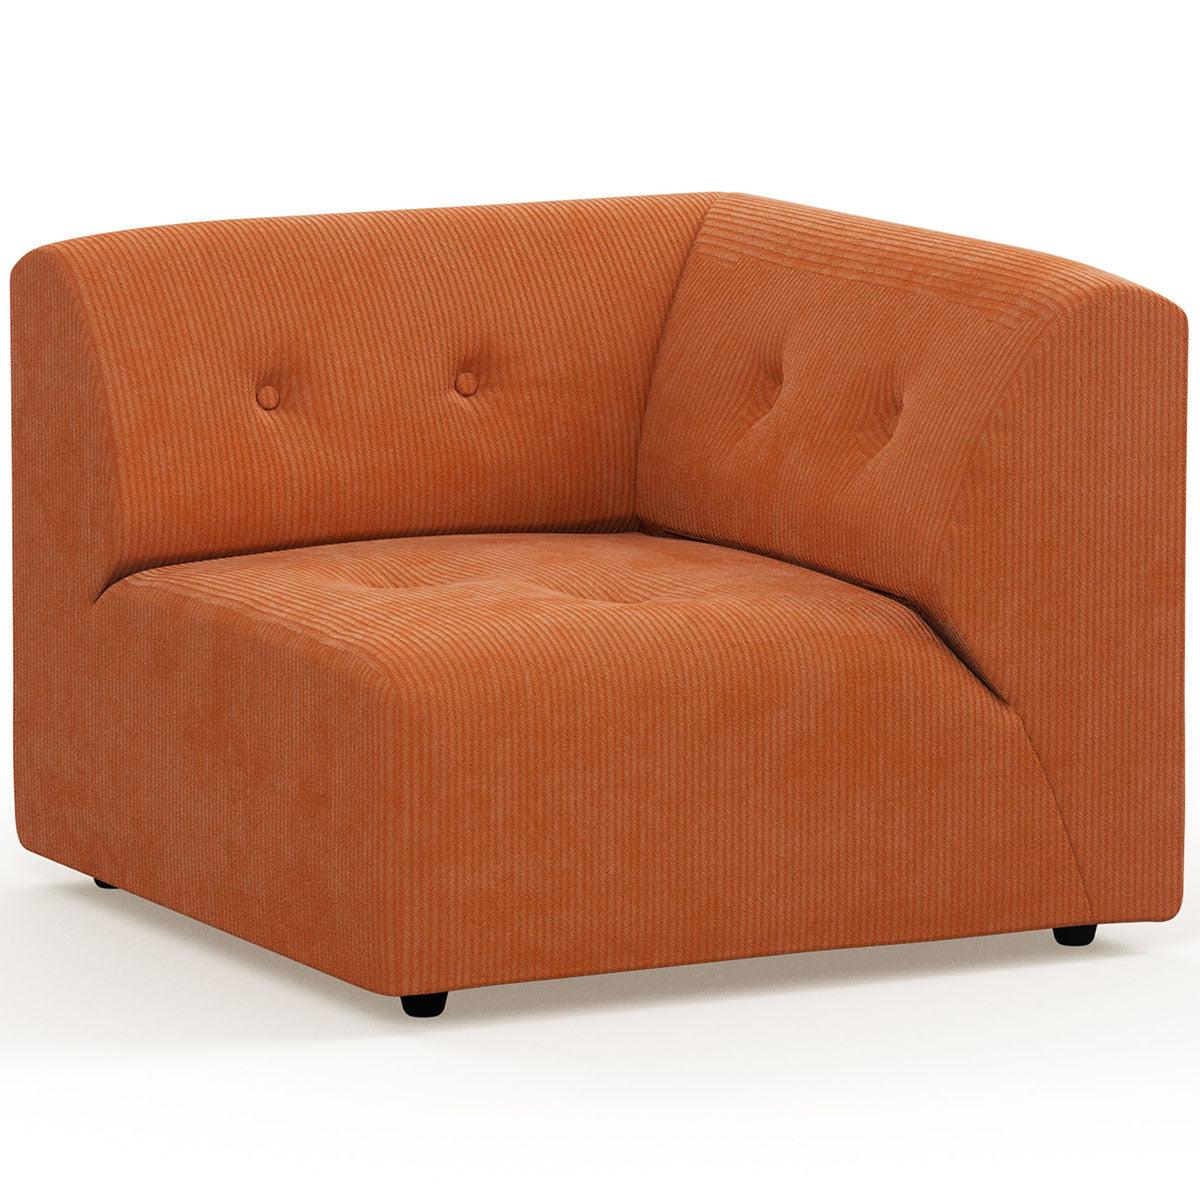 Vint Corduroy Rib Couch - Element Right - WOO .Design